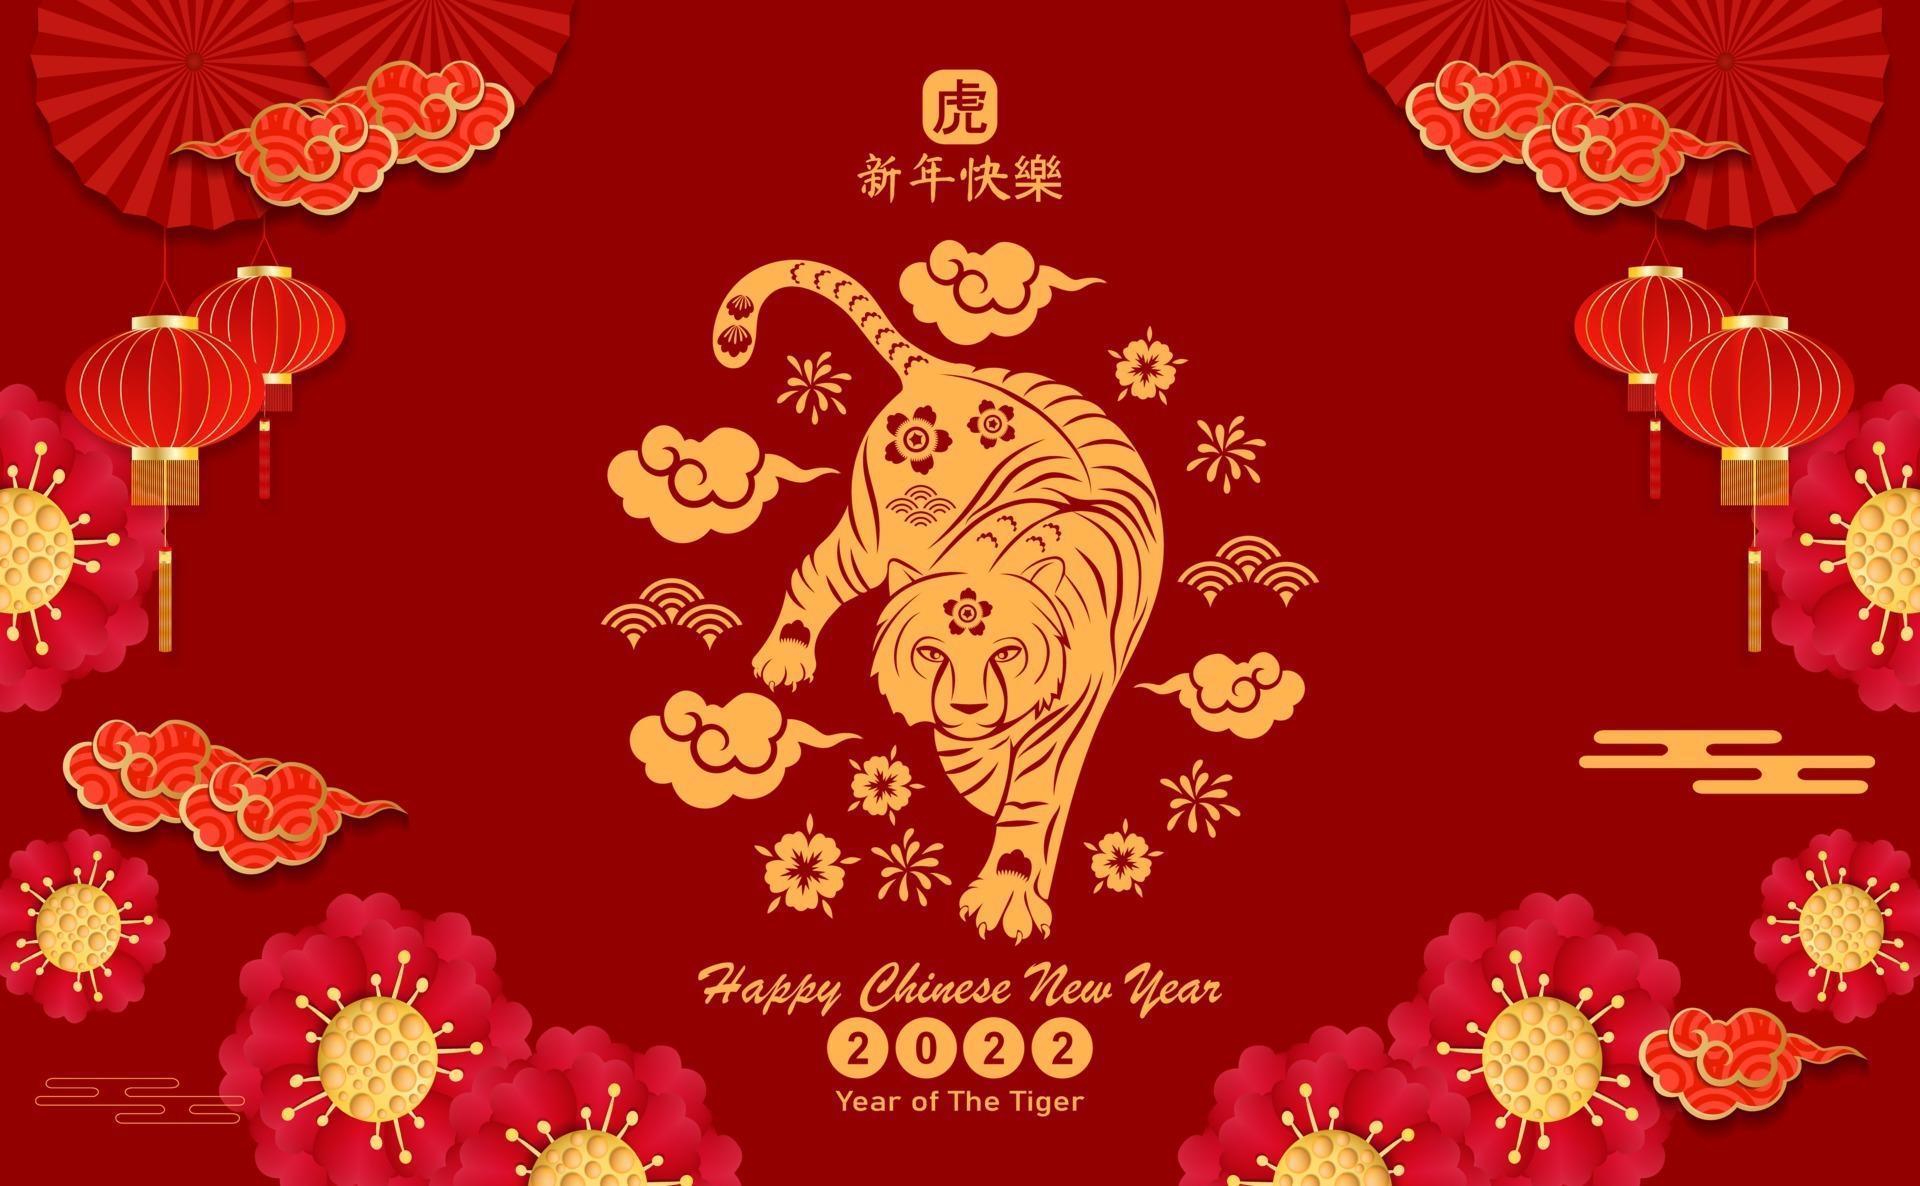 happy-chinese-new-year-2022-year-of-the-tiger-paper-cut-of-vector.jpg